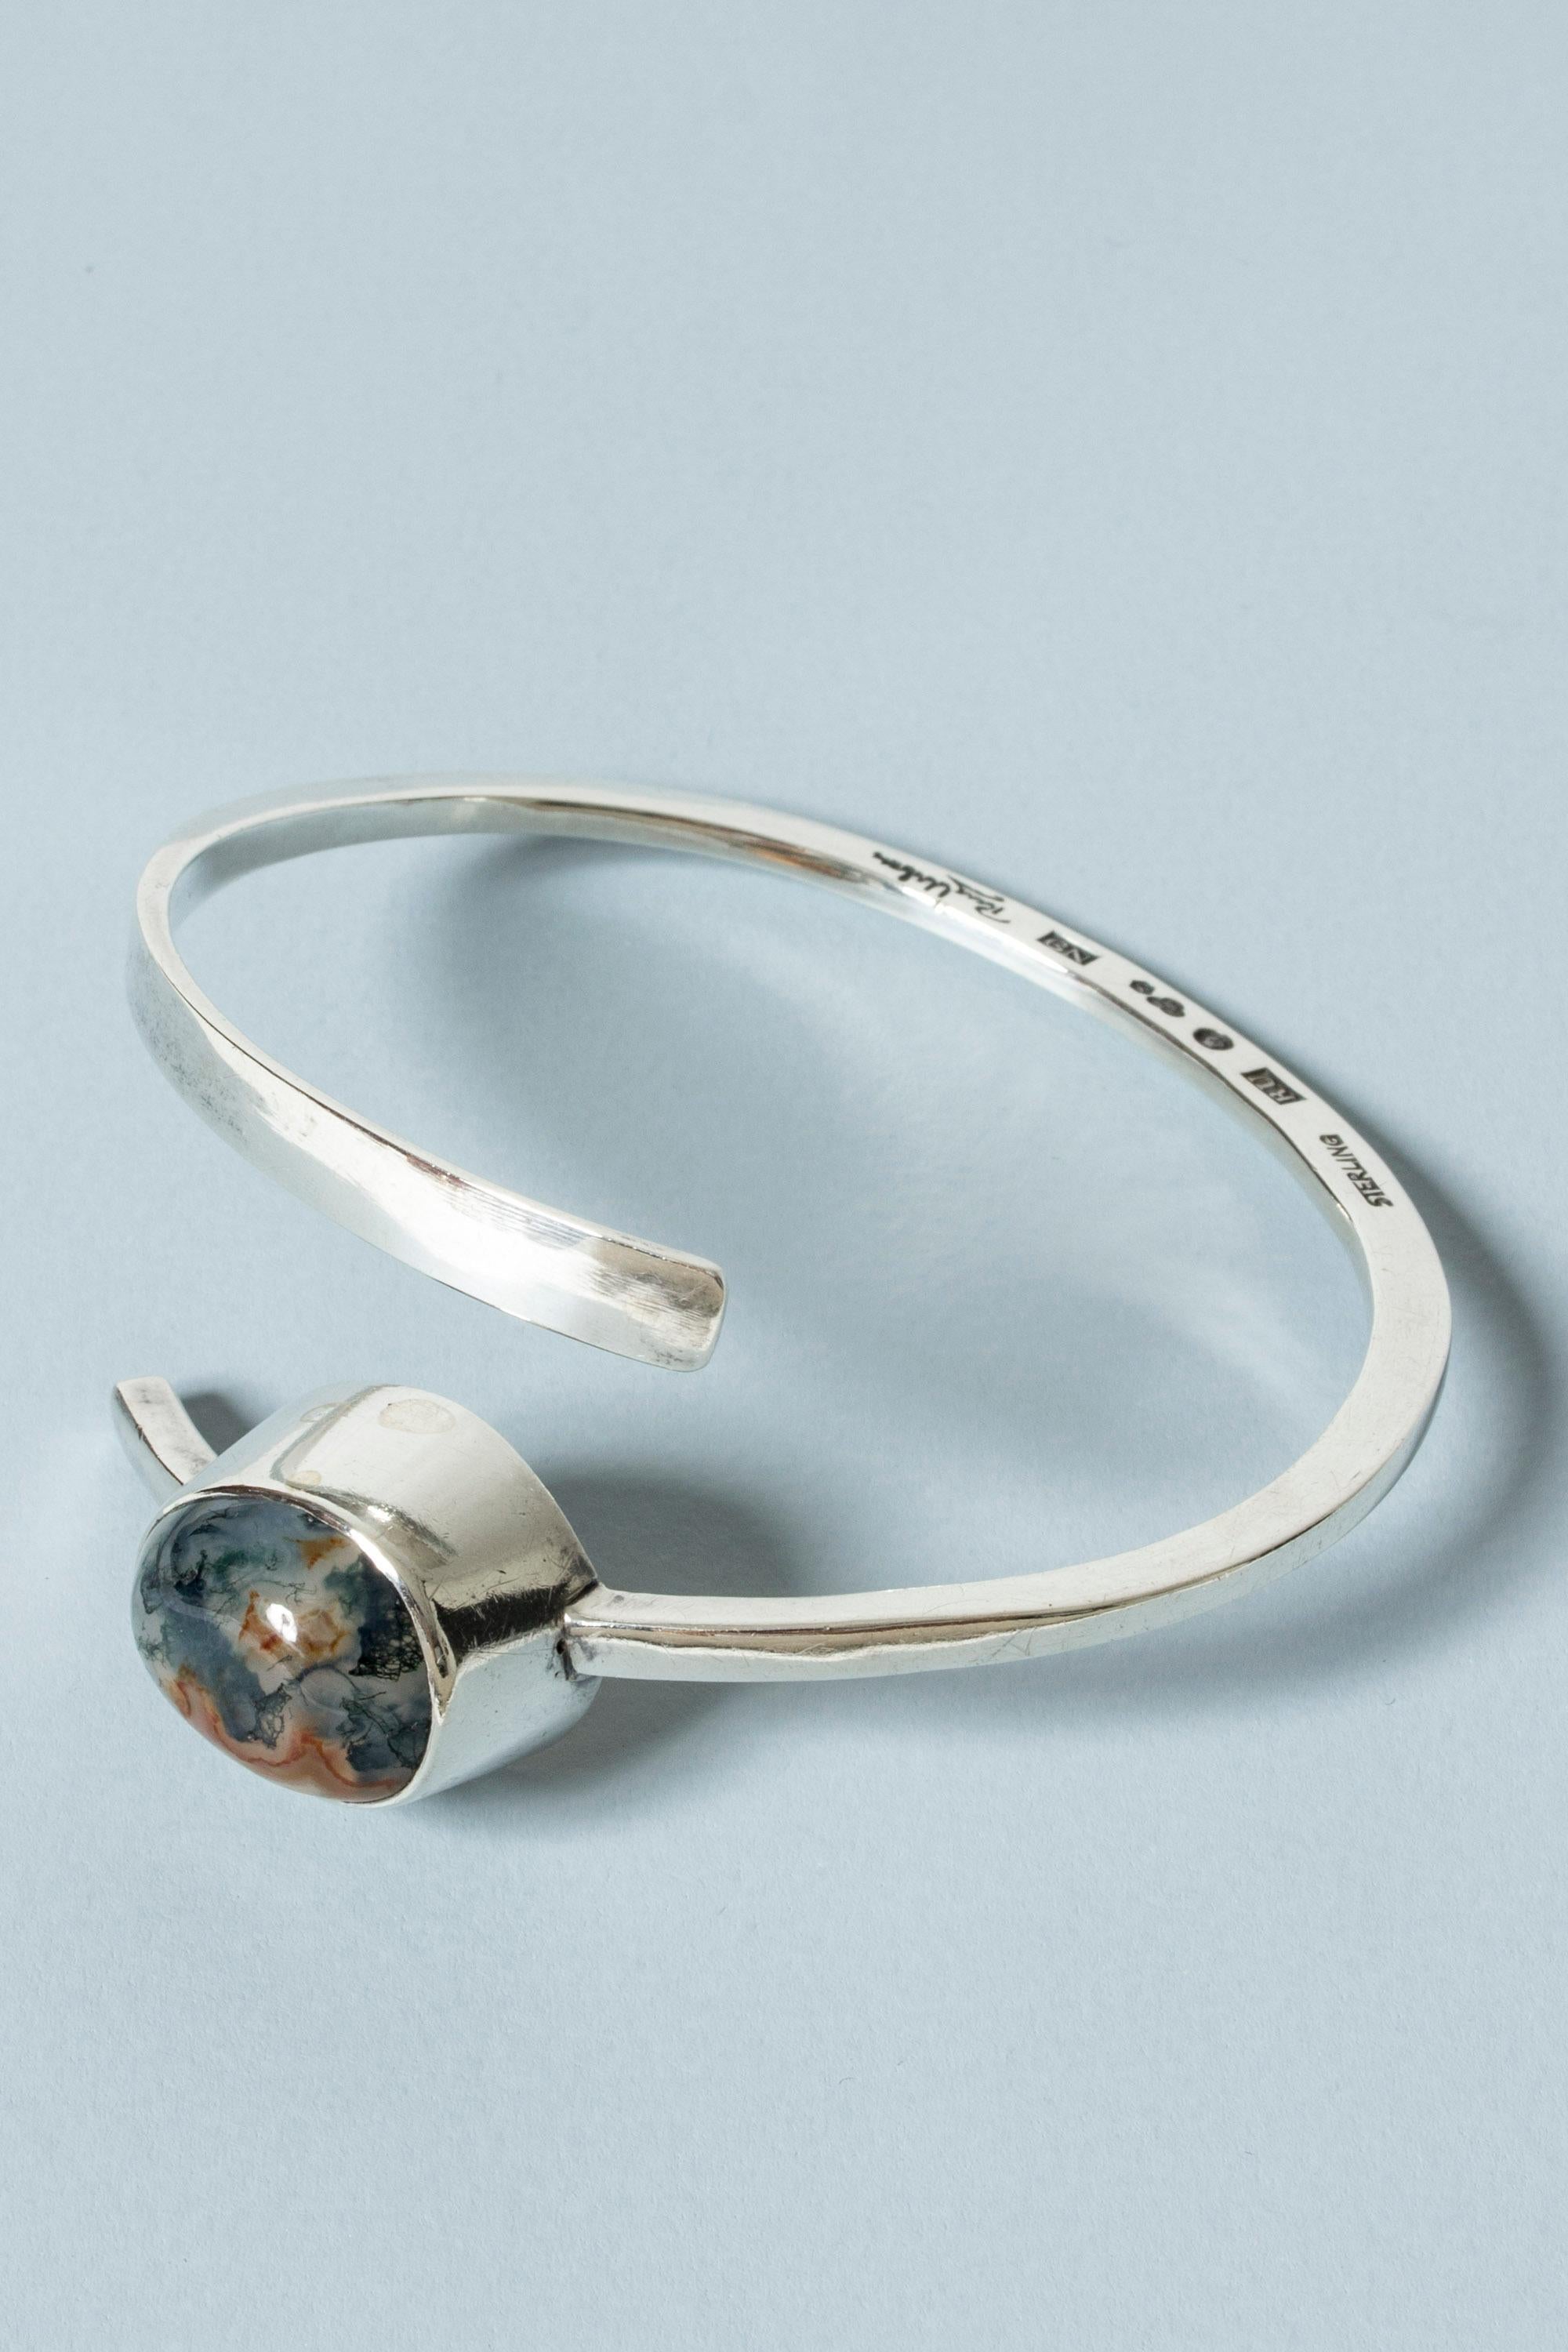 Striking silver bracelet by Rey Urban, in a spiraling design that can be worn pinched around the arm. Adorned with a mesmerizing, large moss agate stone.